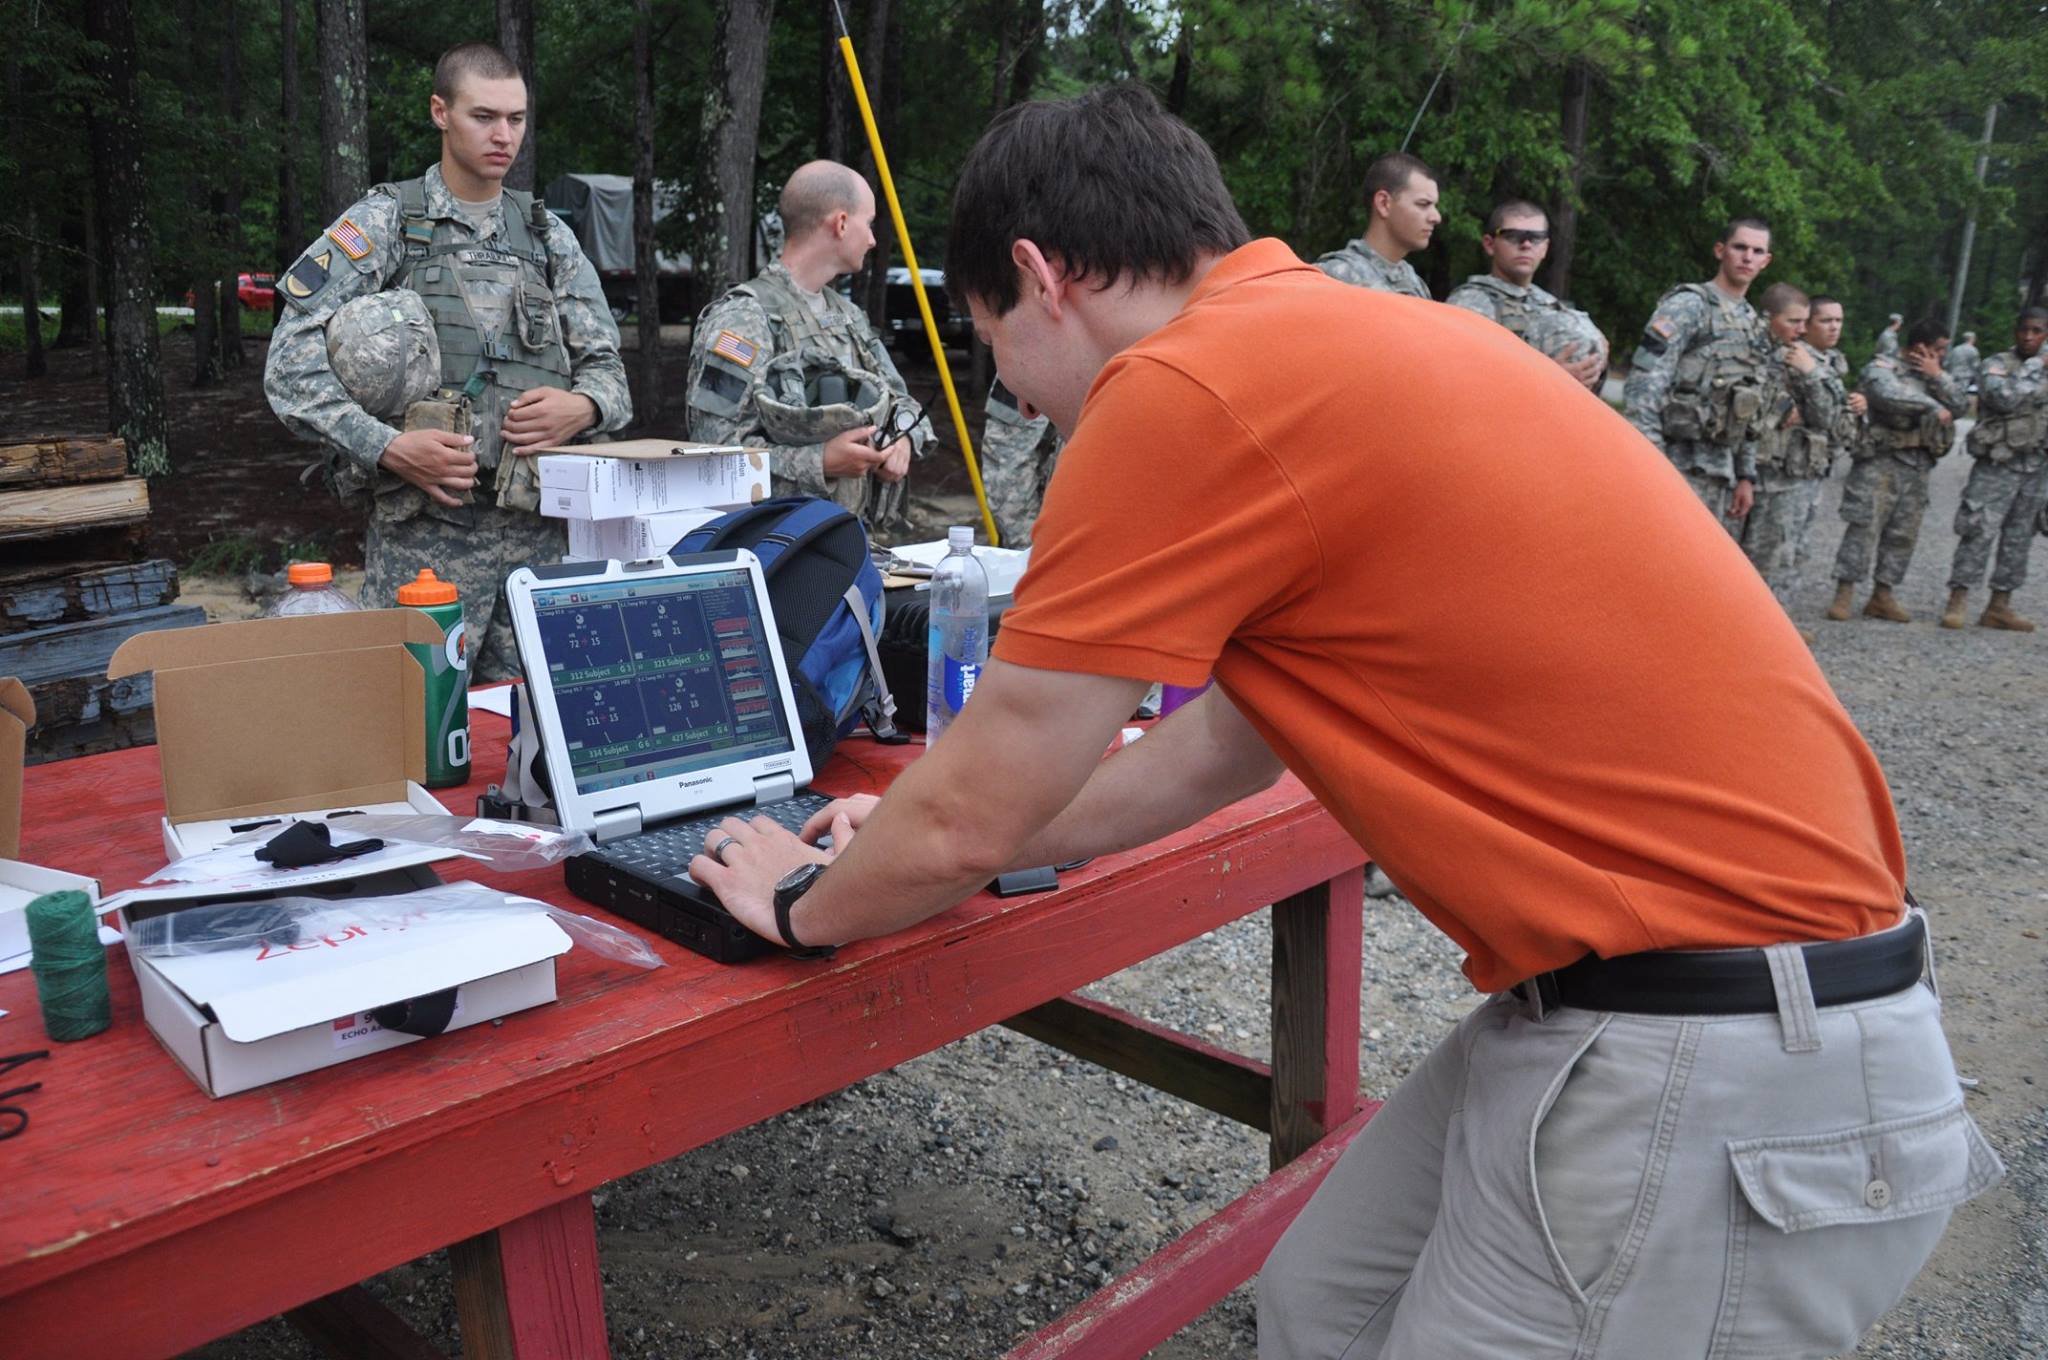 A member of the Warrior Research Center works on a computer while military members look on during a research study.